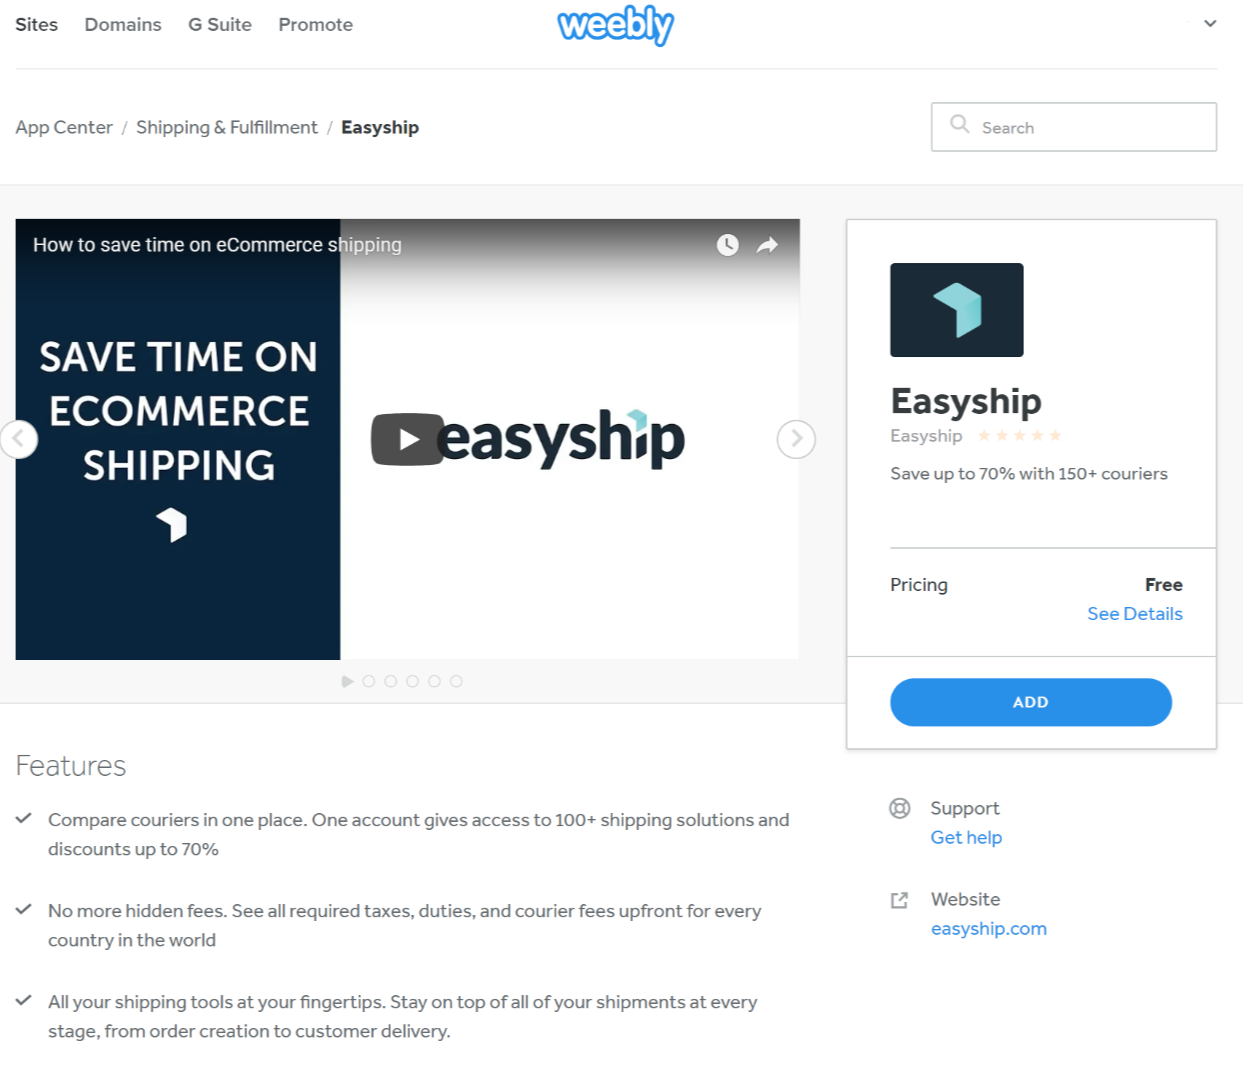 Connect Weebly Store to Easyship